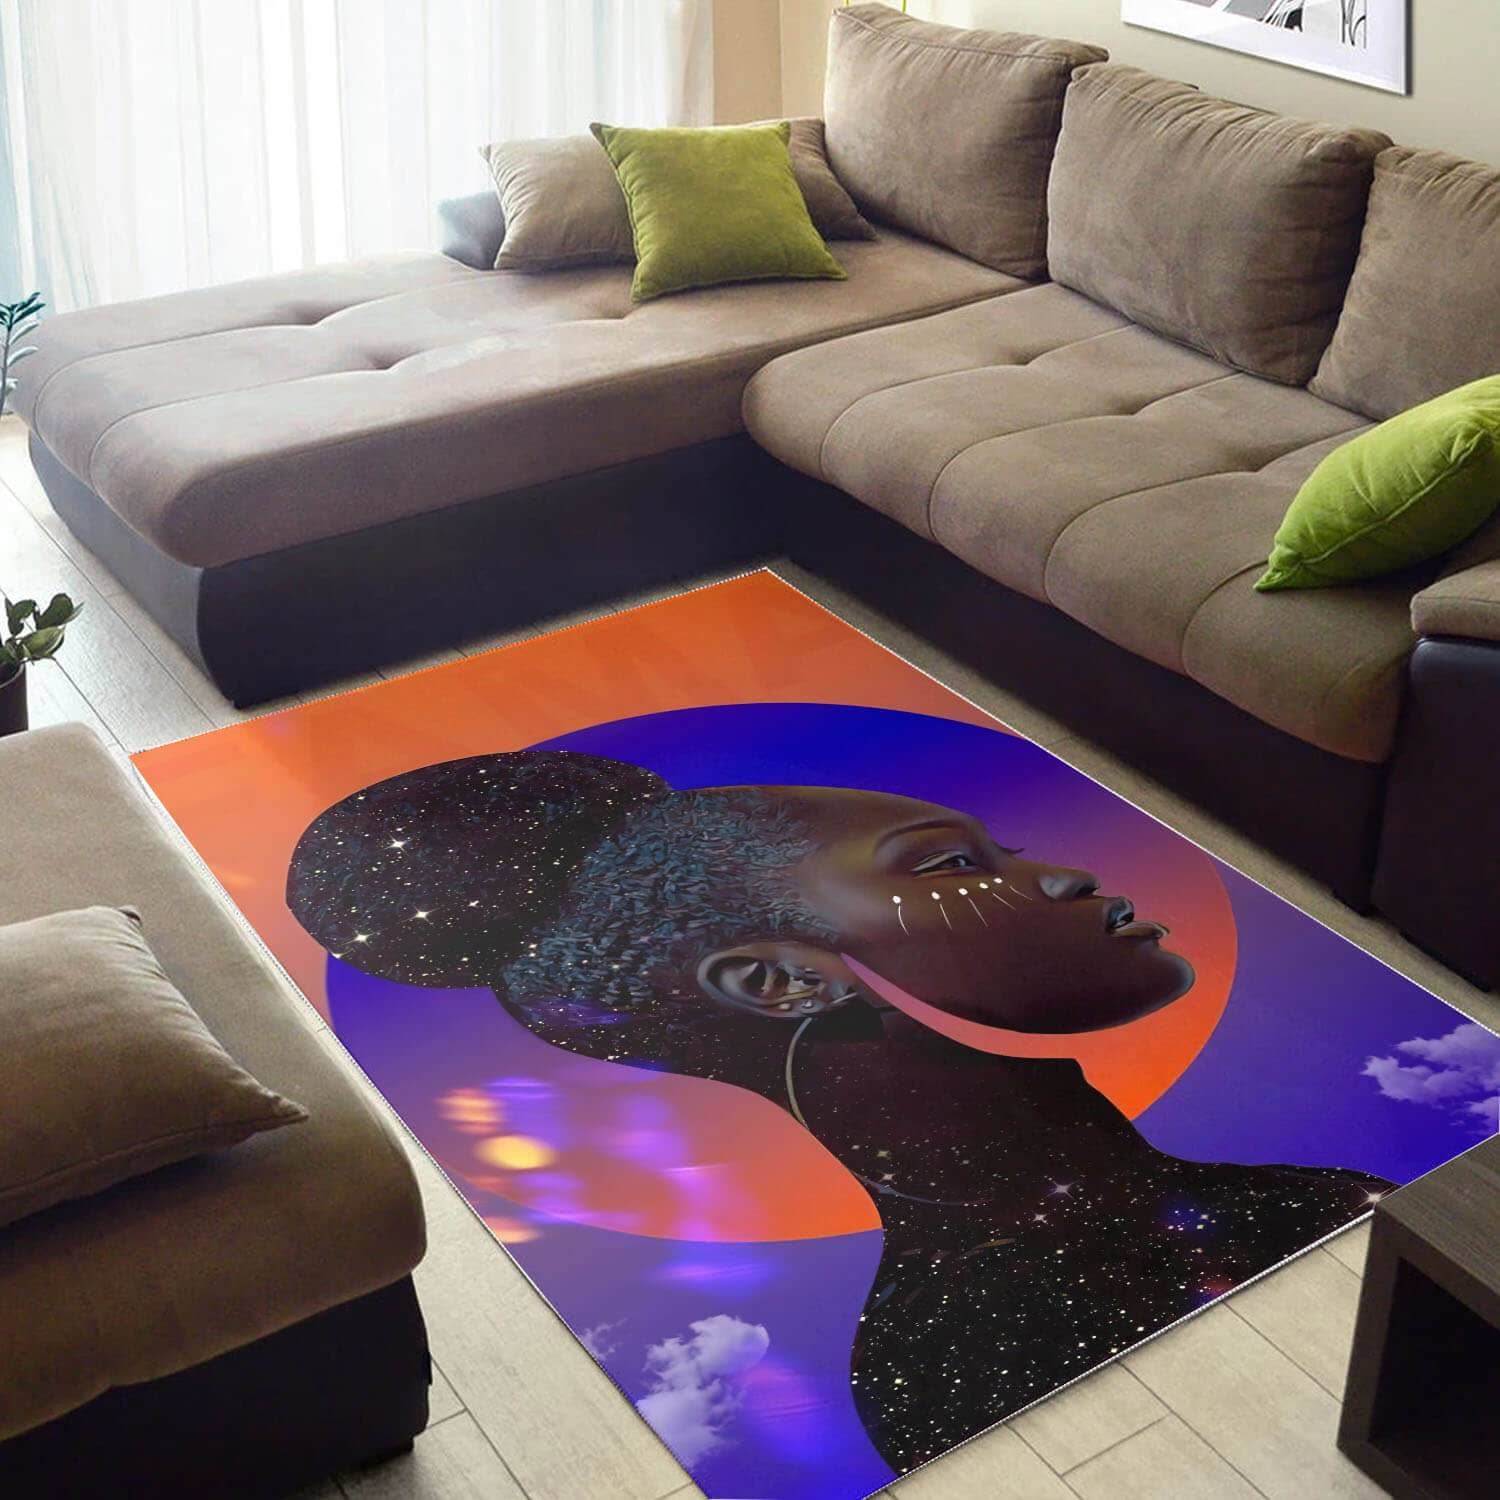 African Pretty Melanin Afro Girl Carpet Design Afrocentric Decorating Ideas Rug